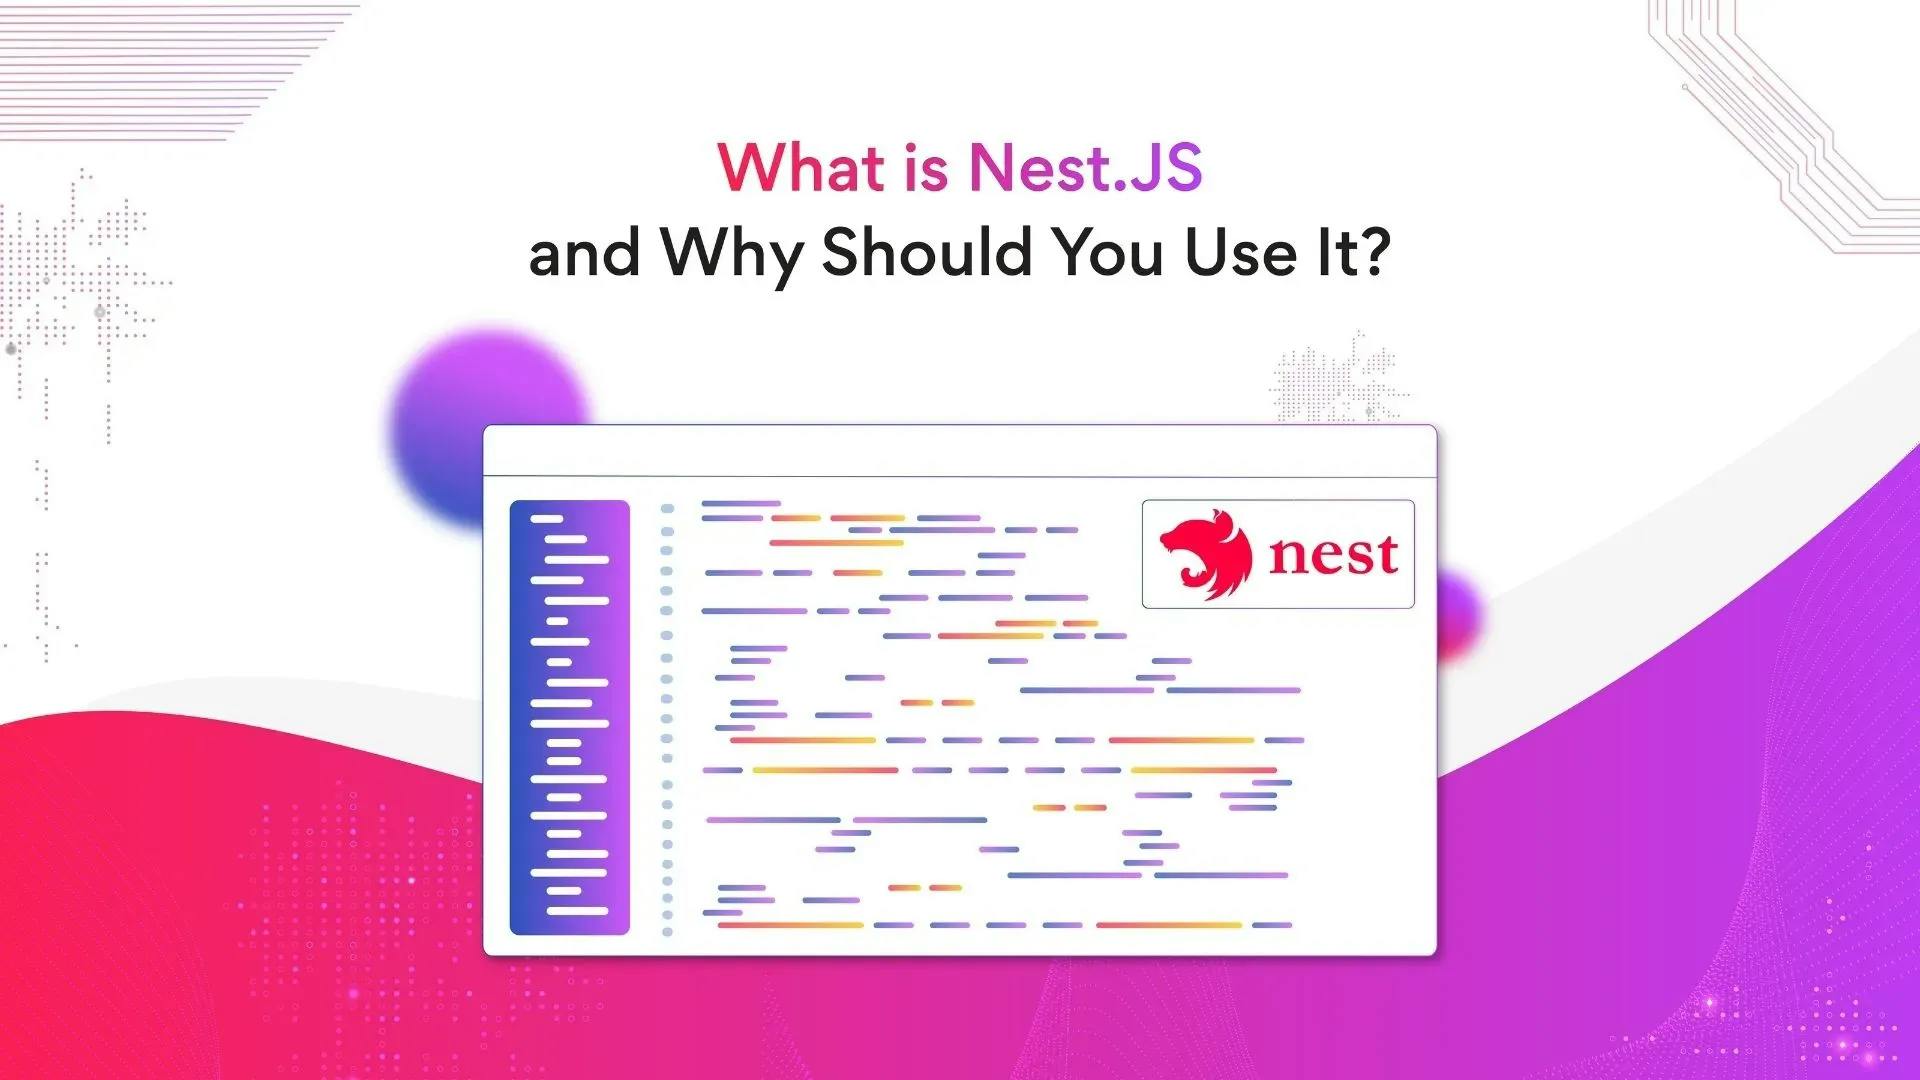 What Is Nest.JS? Why Should You Use It?